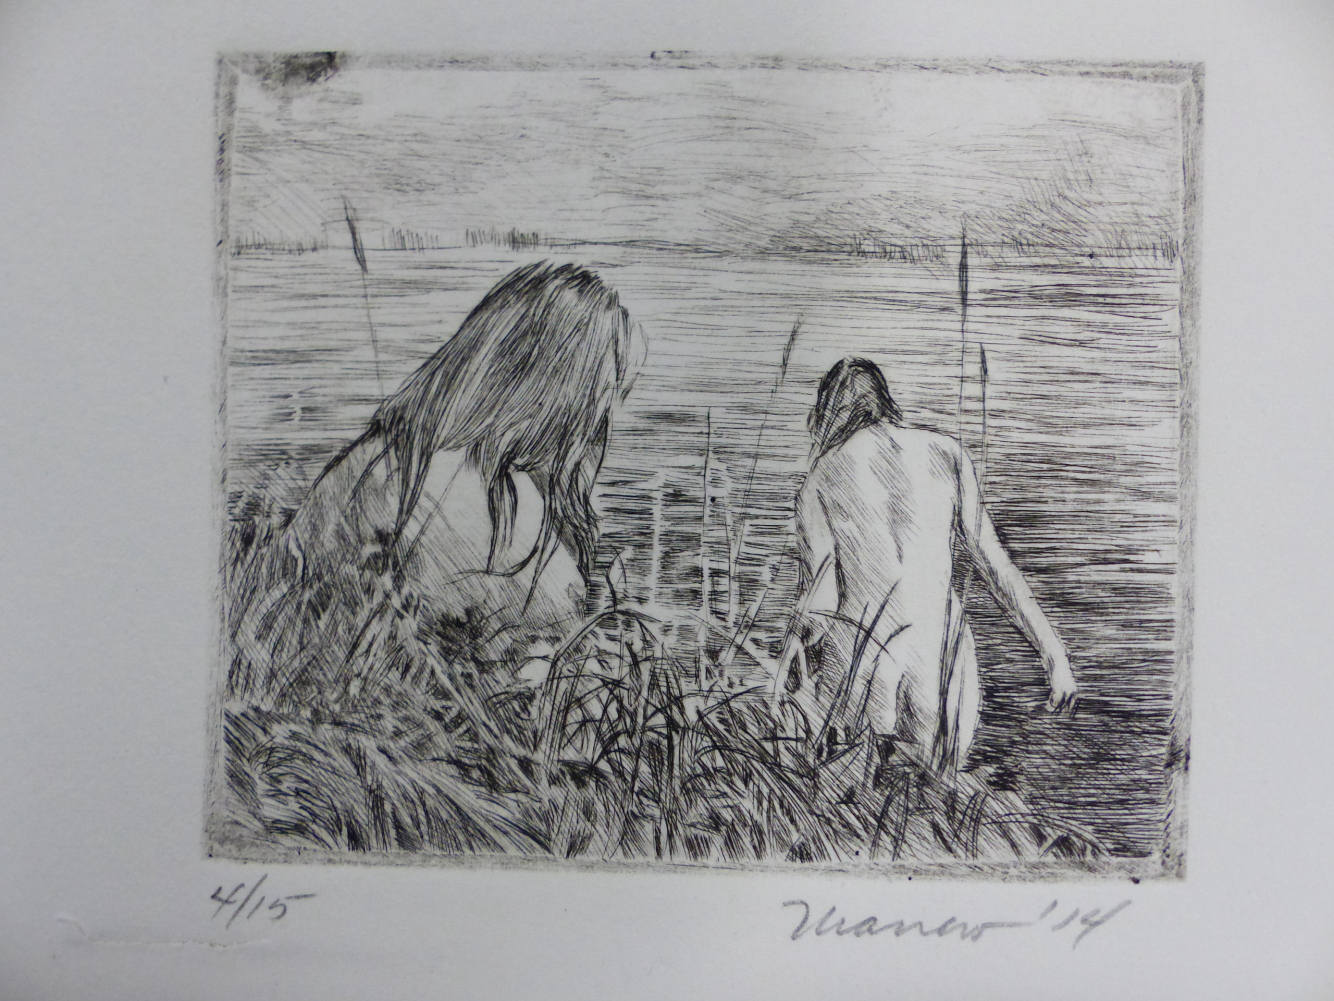 SIX 20th/21st C. ETCHINGS OF FIGURAL SUBJECTS BY DIFFERENT HANDS, MOST PENCIL SIGNED INCLUDES - Image 5 of 6